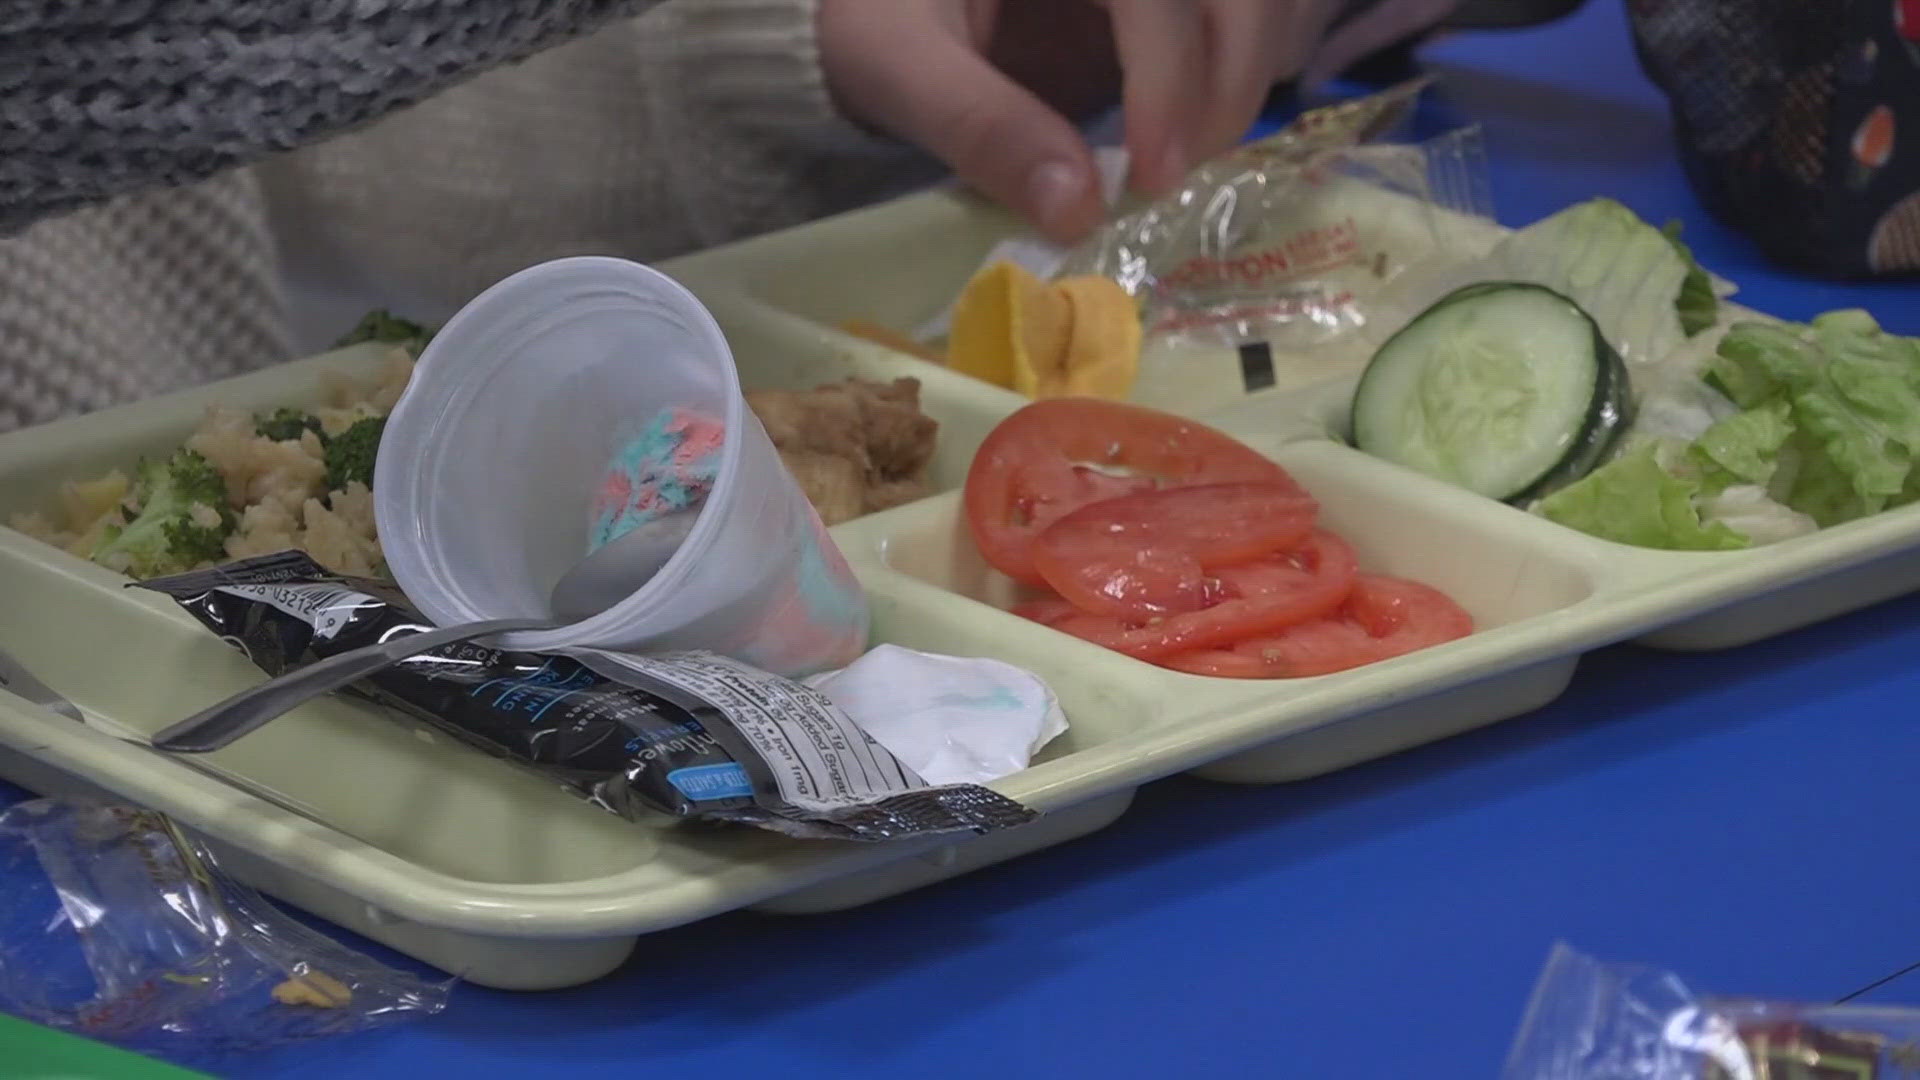 Along with other free meal initiatives, program officials said eligible families can receive $120 per child to help with food costs during summer break.